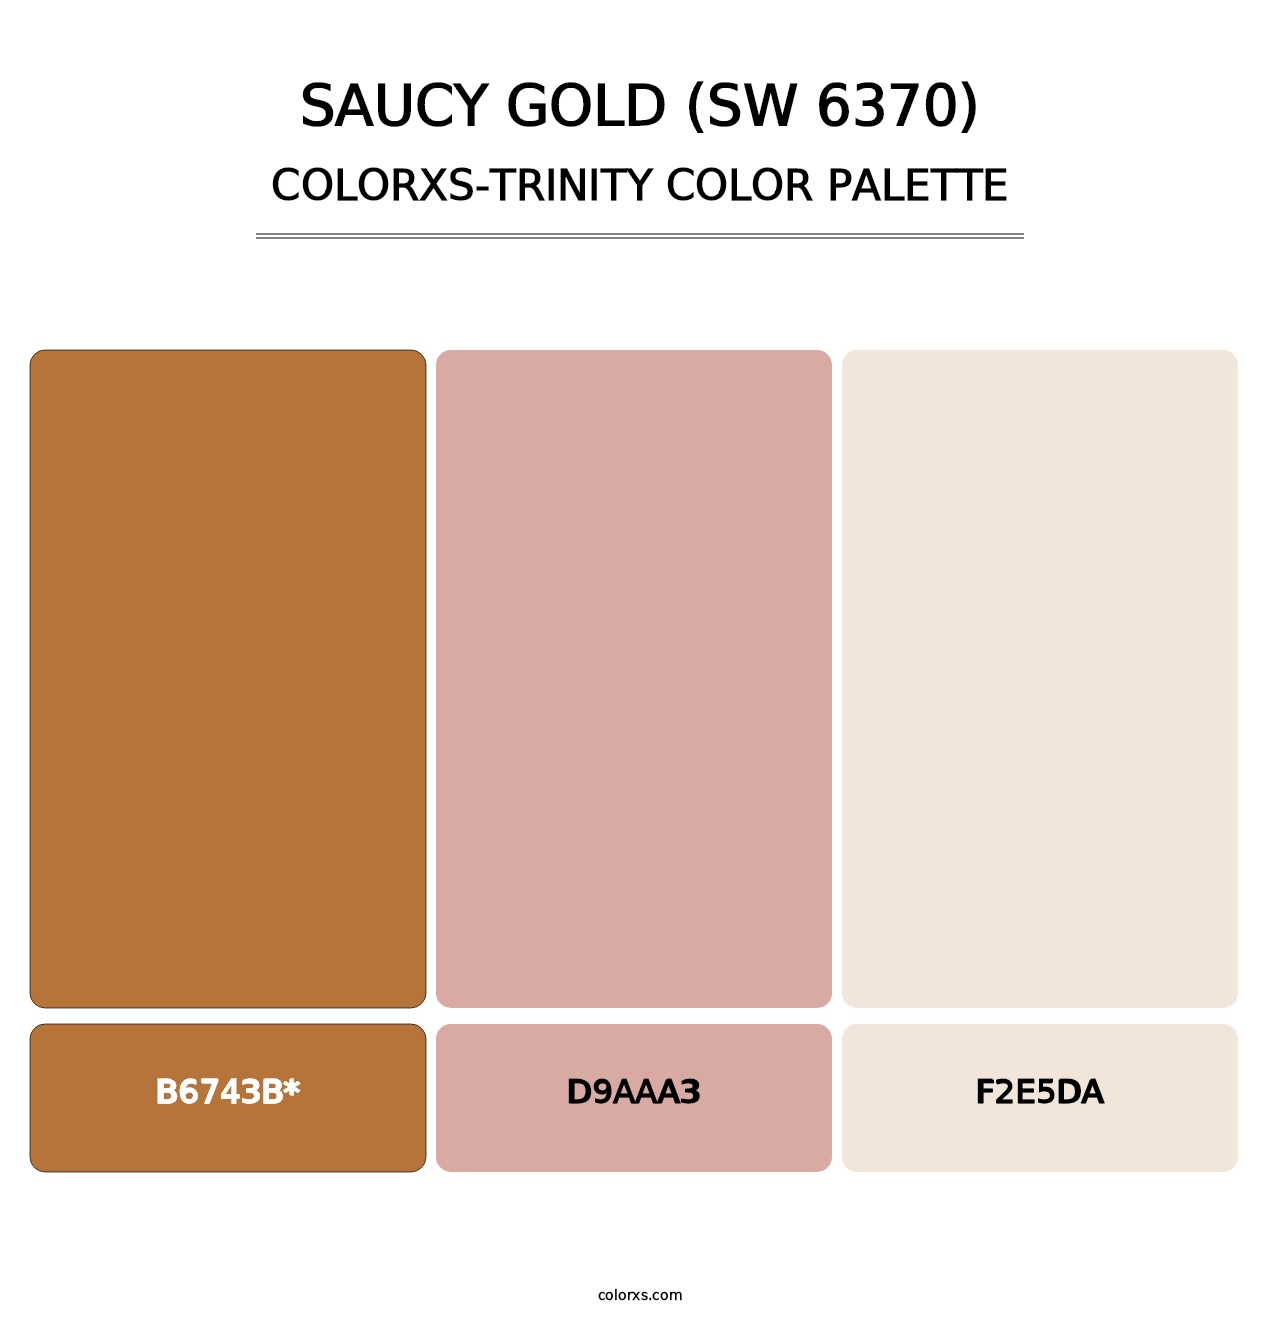 Saucy Gold (SW 6370) - Colorxs Trinity Palette